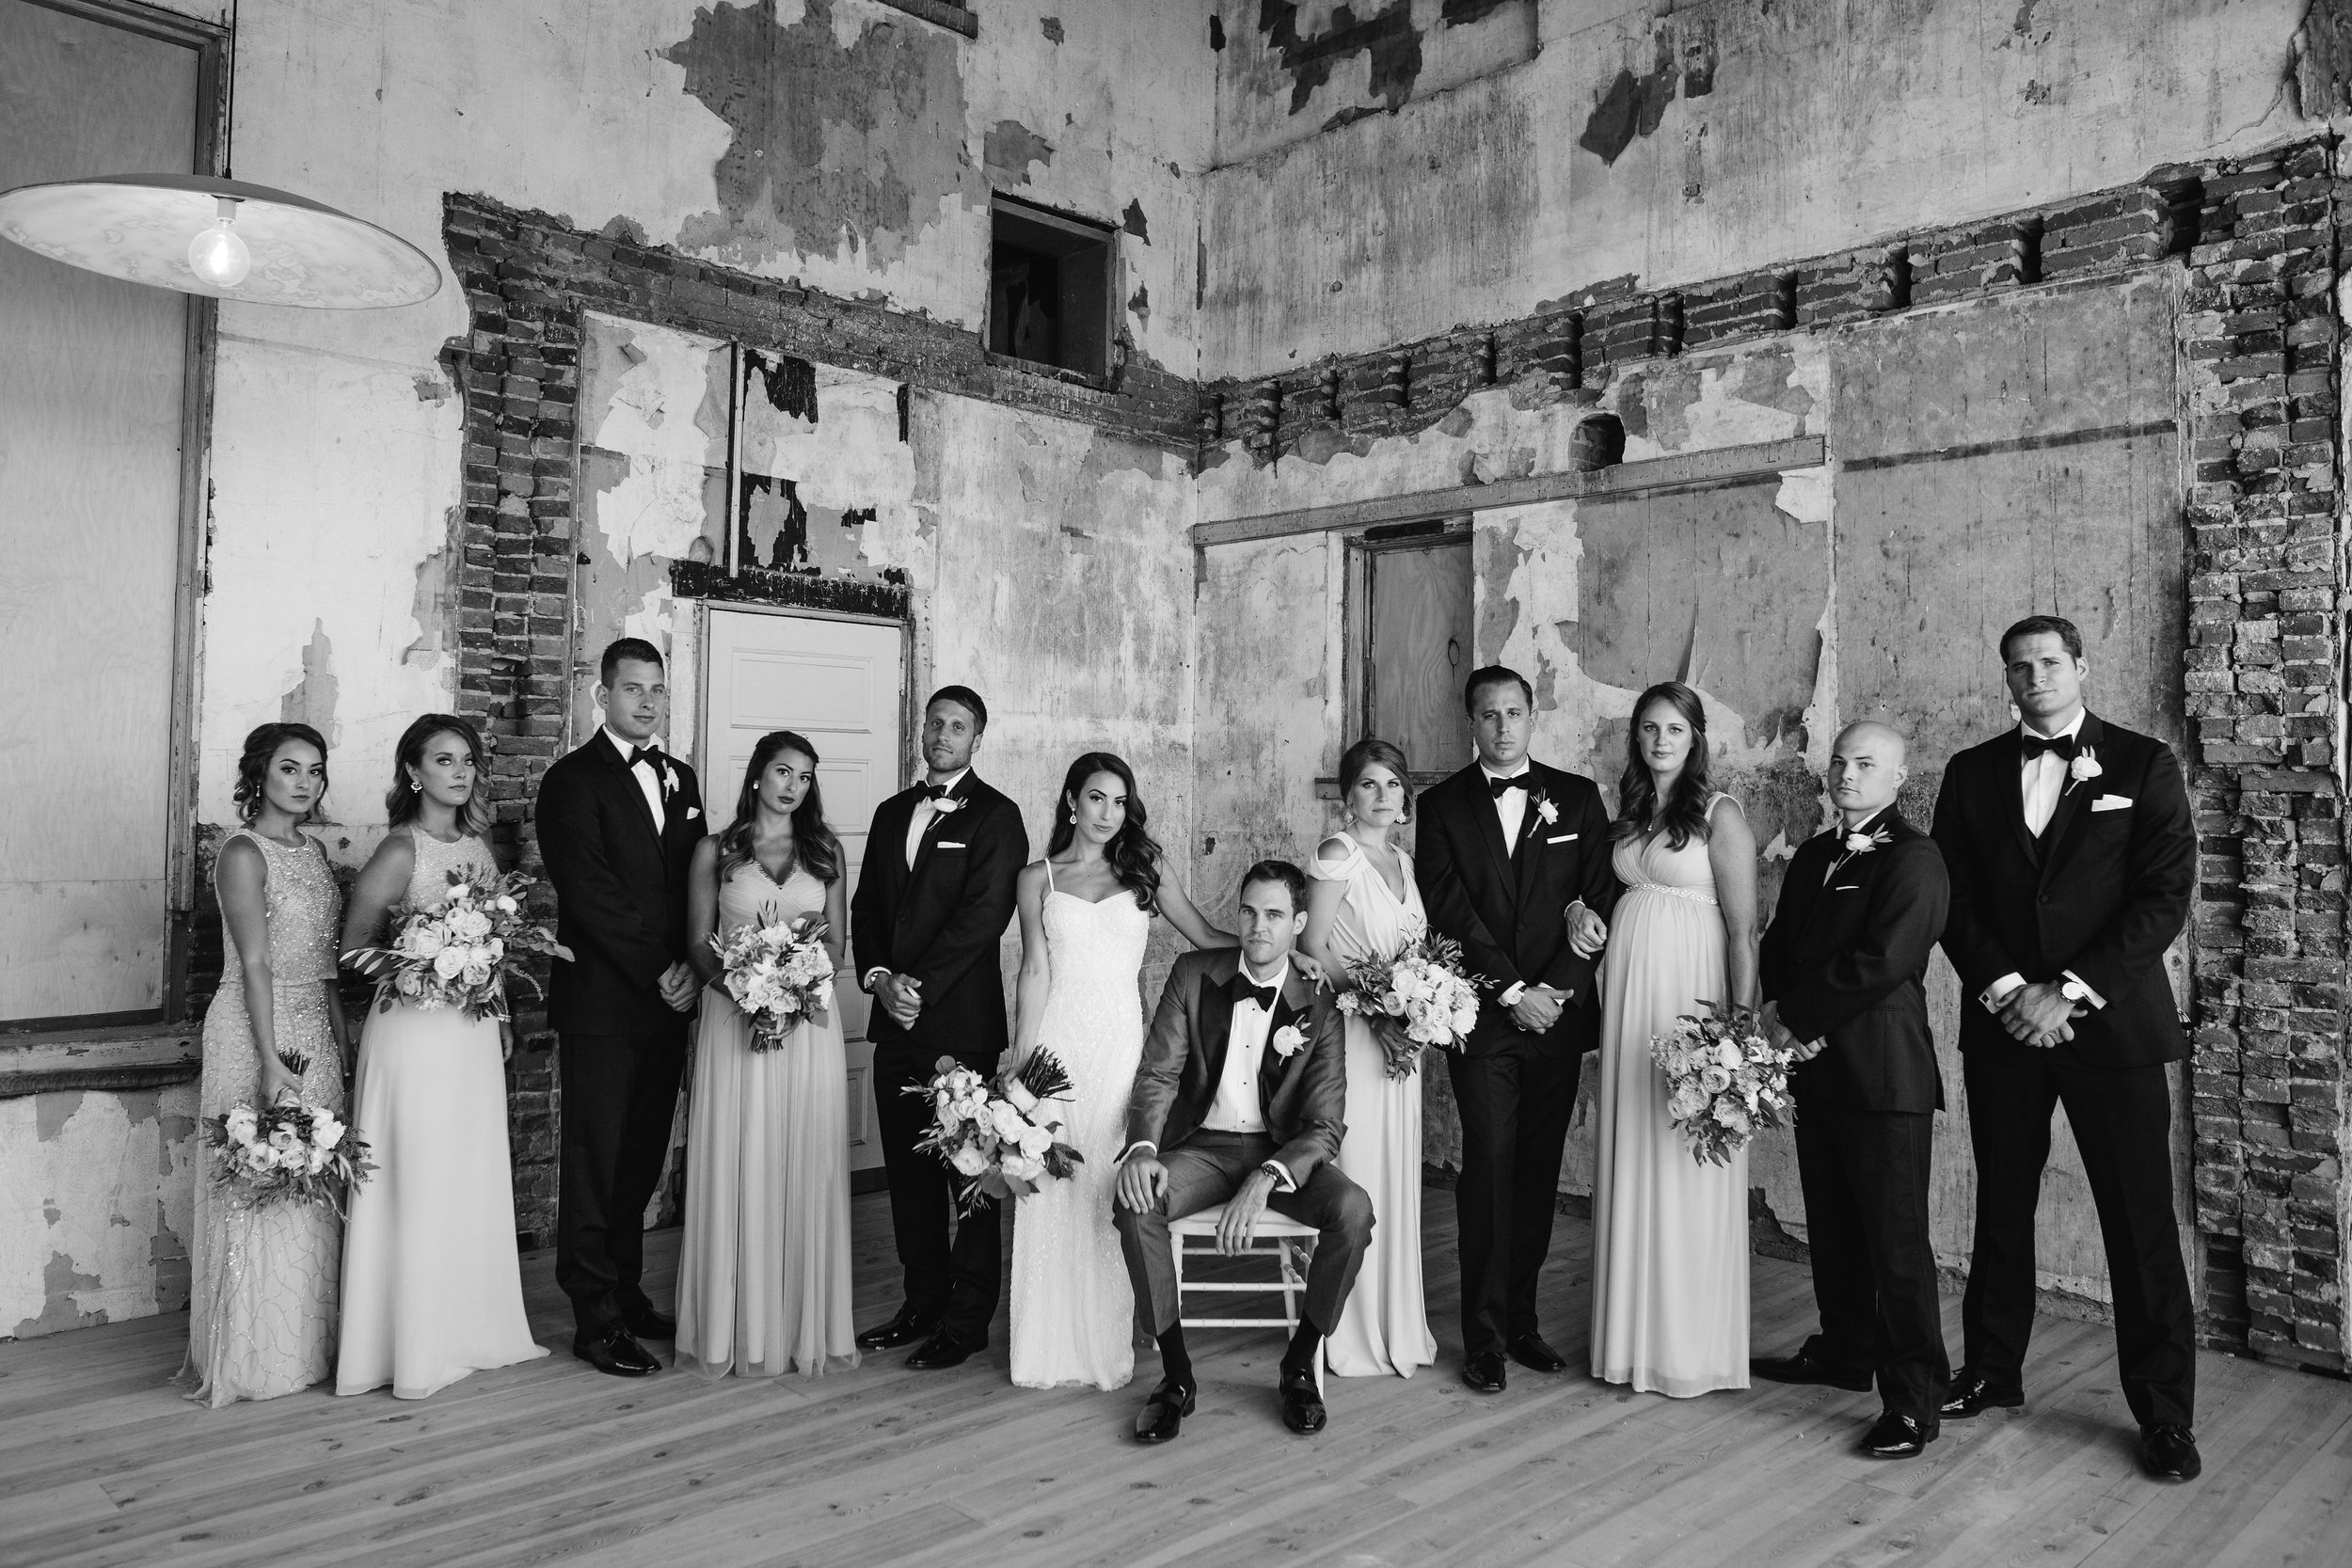 Bridal party in a rustic antique room black and white photo